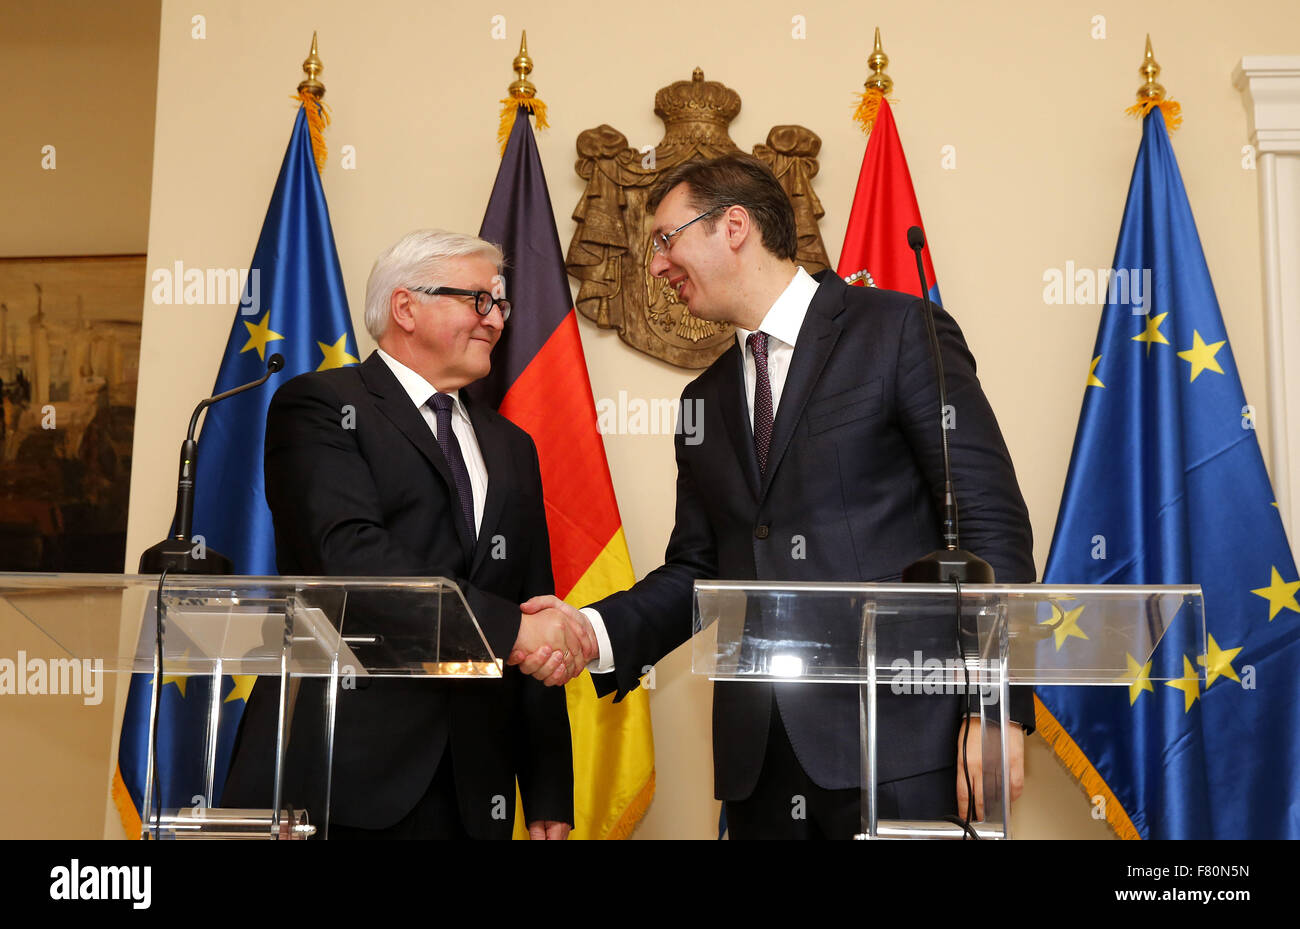 Belgrade. 4th Dec, 2015. German Foreign Minister Frank-Walter Steinmeier (L) shakes hands with Serbian Prime Minister Aleksandar Vucic (R) during a press conference after their meeting at the 22nd OSCE Ministerial Council